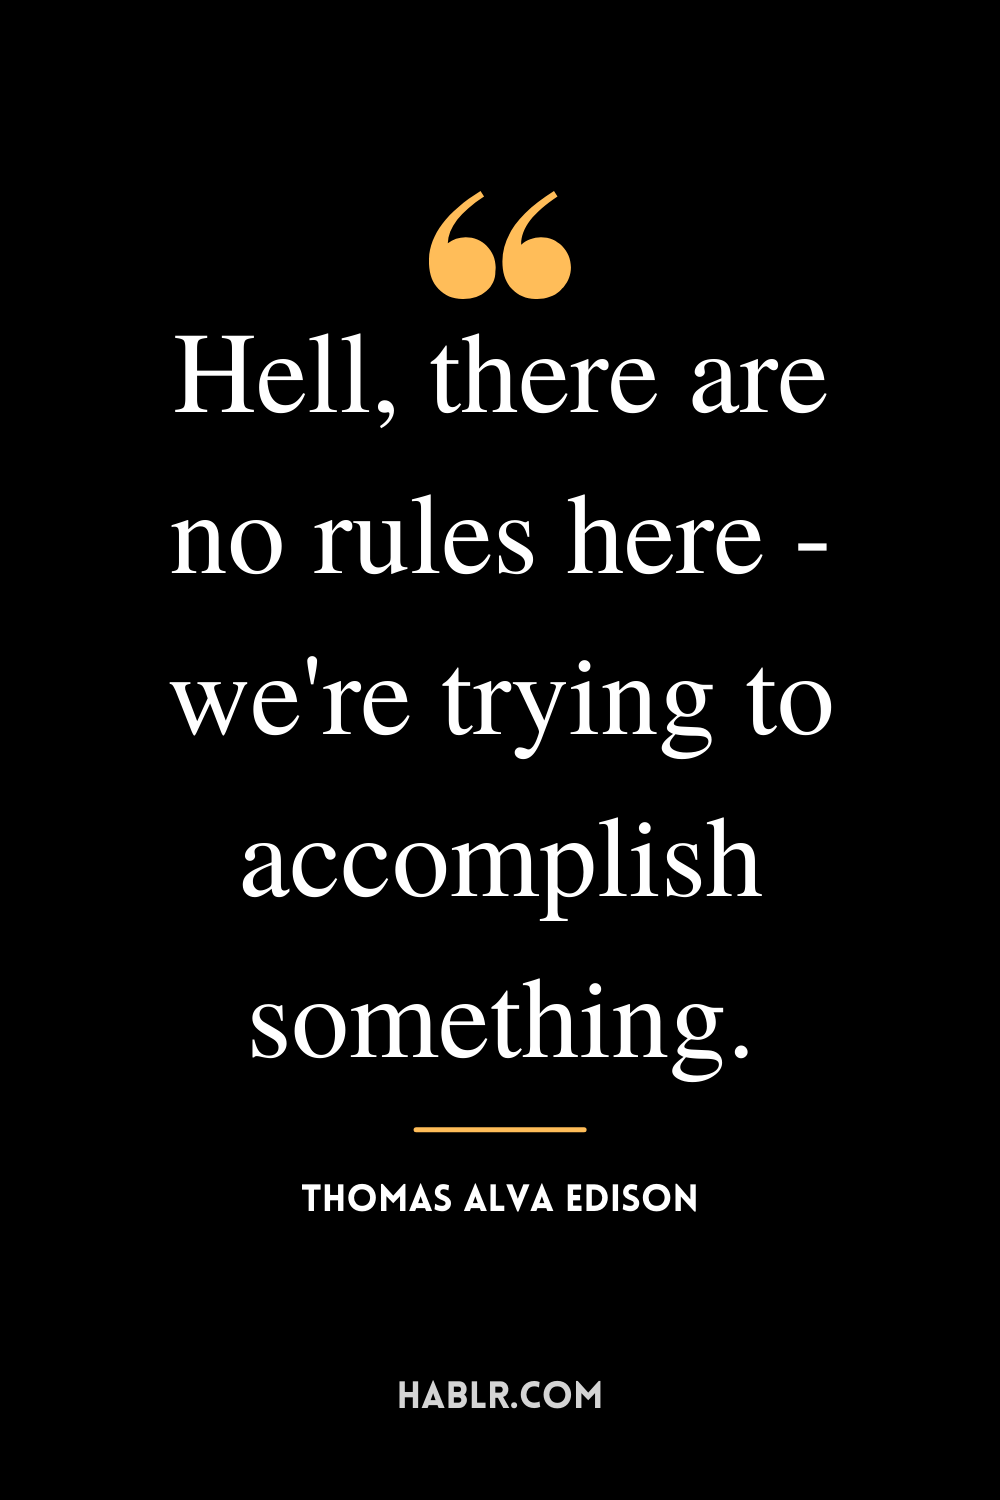 "Hell, there are no rules here - we're trying to accomplish something." -Thomas Alva Edison